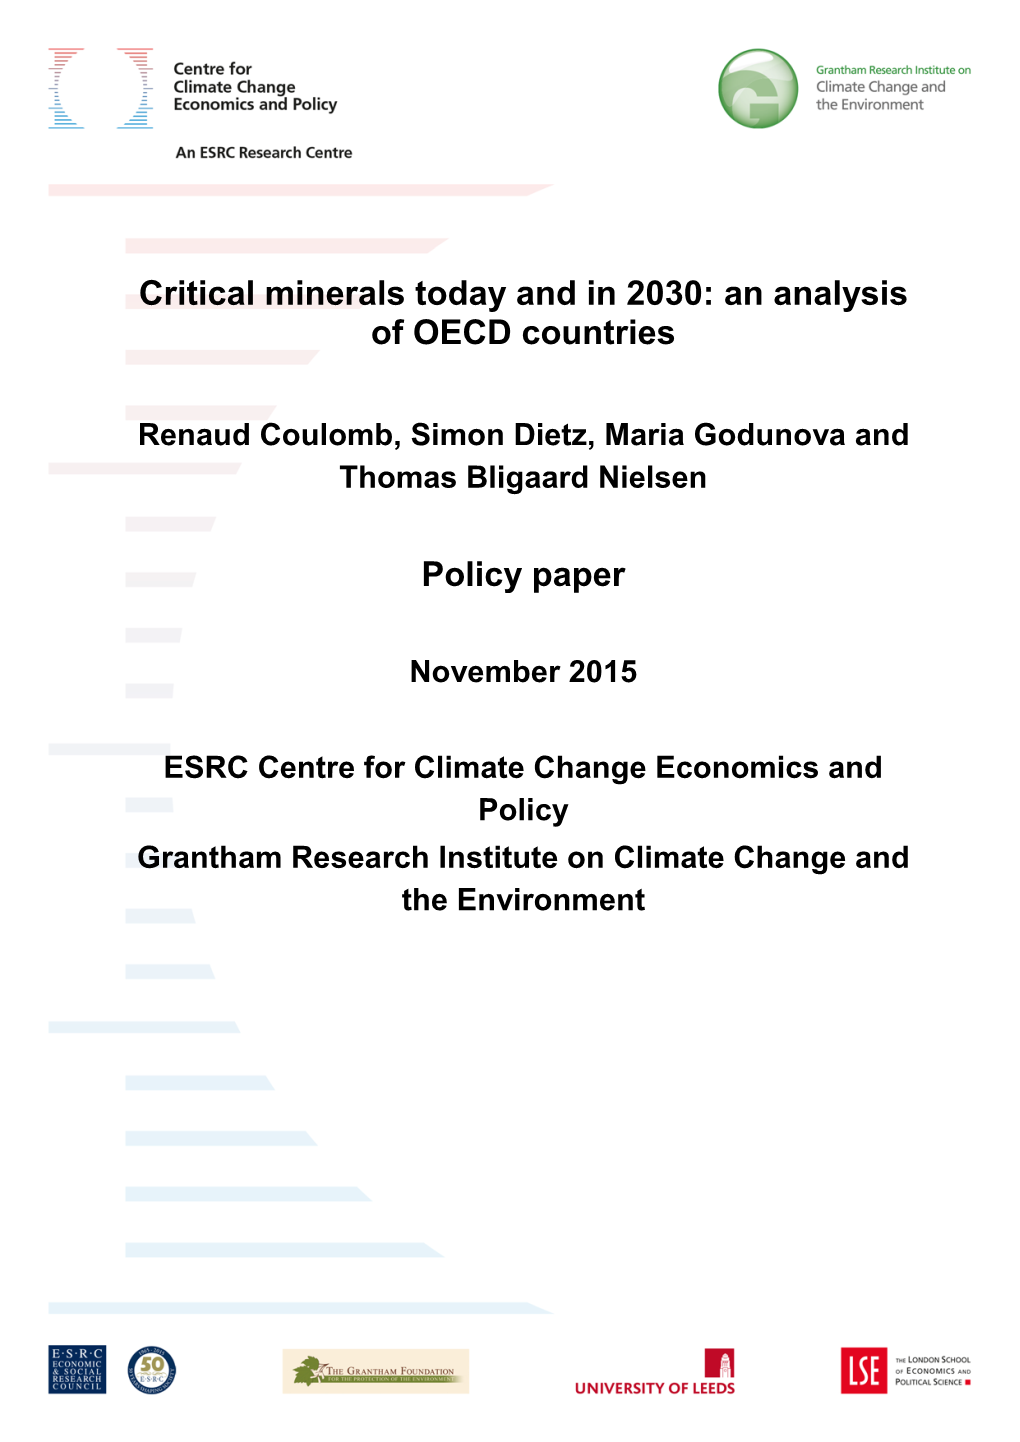 Critical Minerals Today and in 2030: an Analysis of OECD Countries Policy Paper